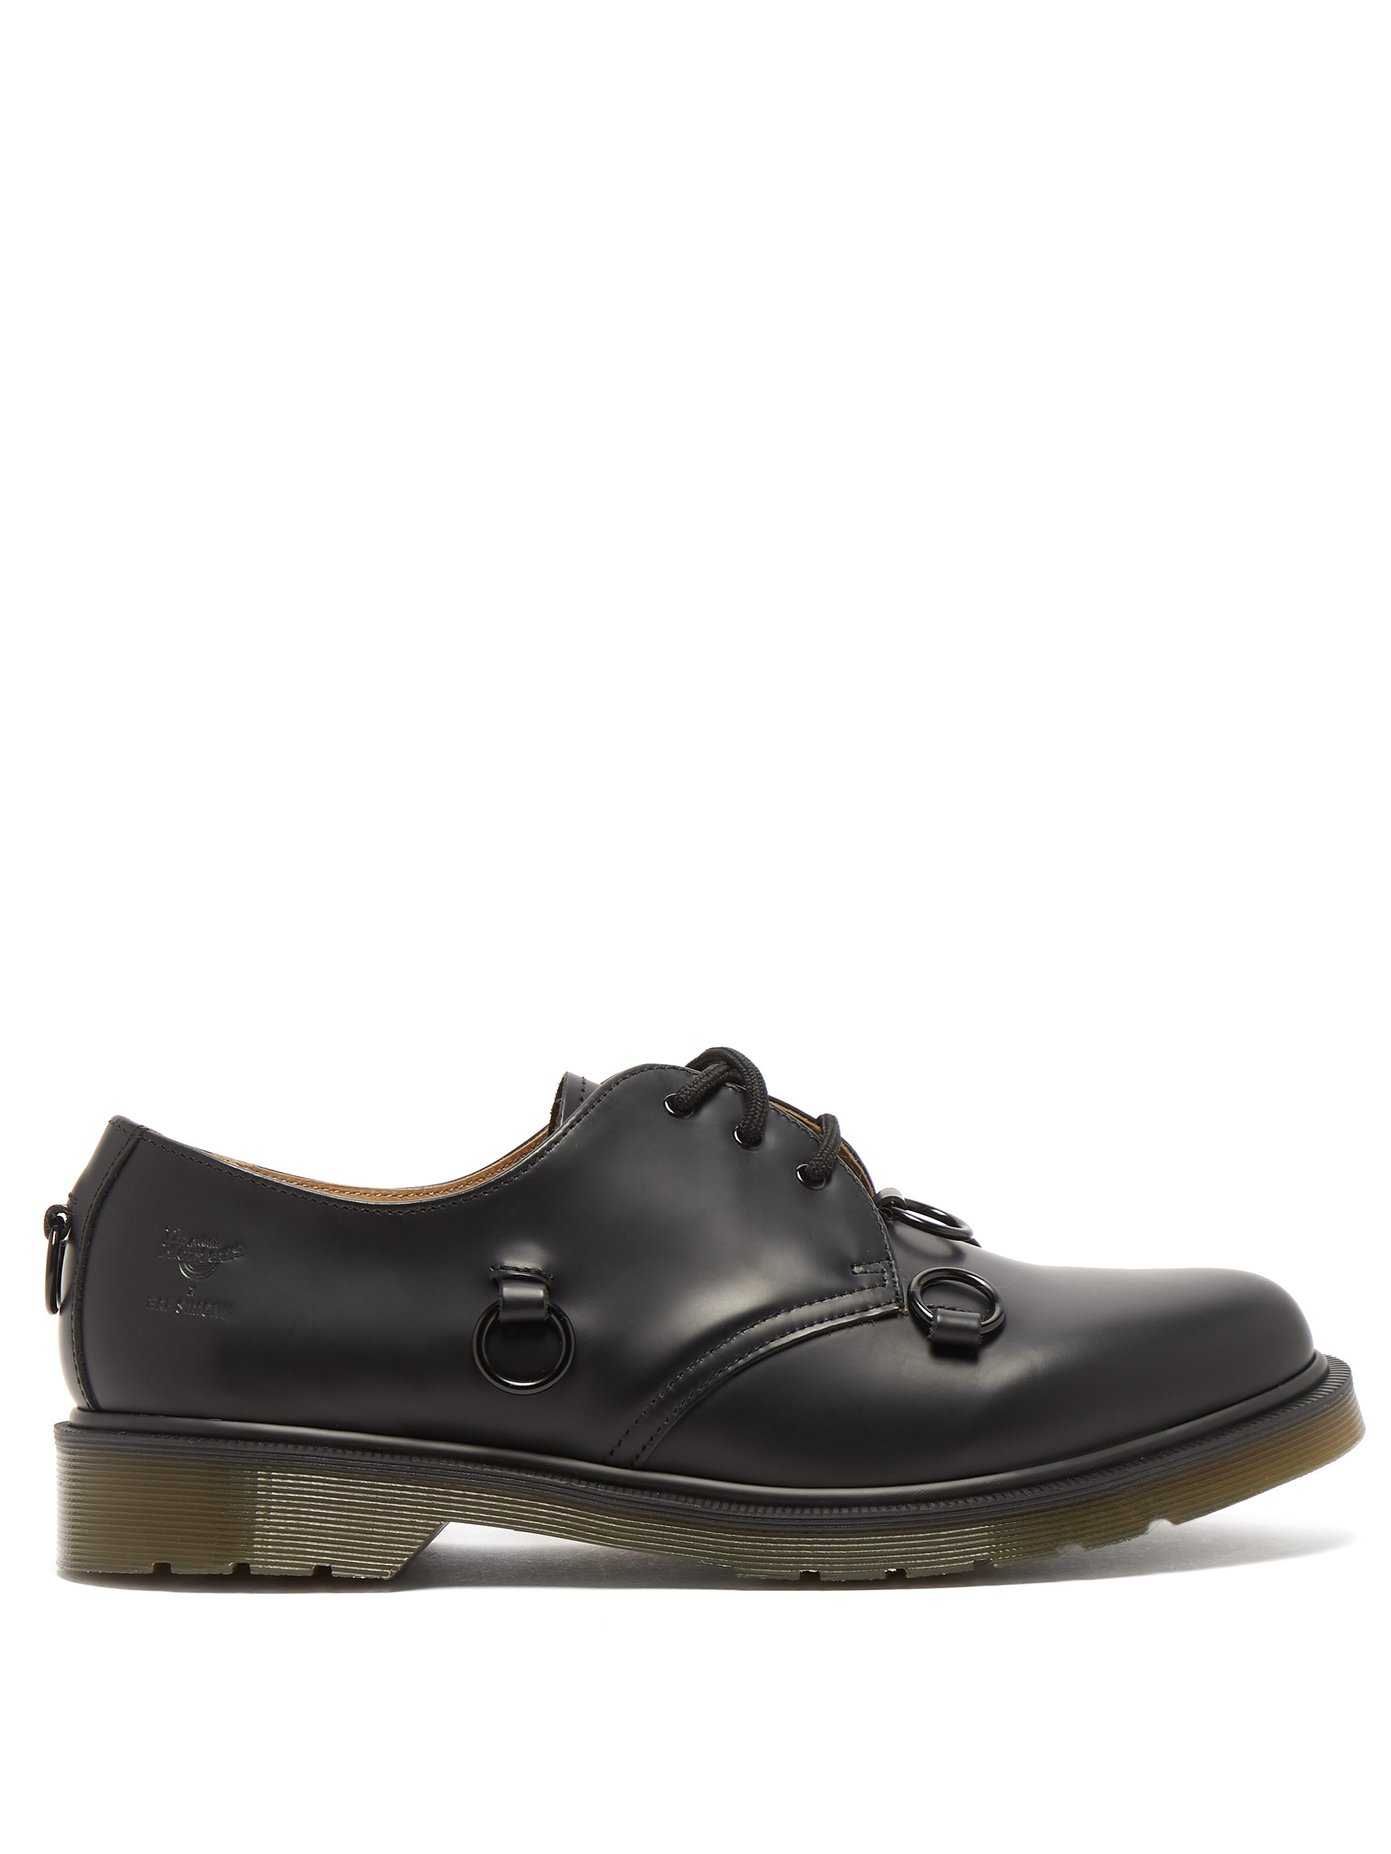 X Dr. Martens 1461 lace-up leather 